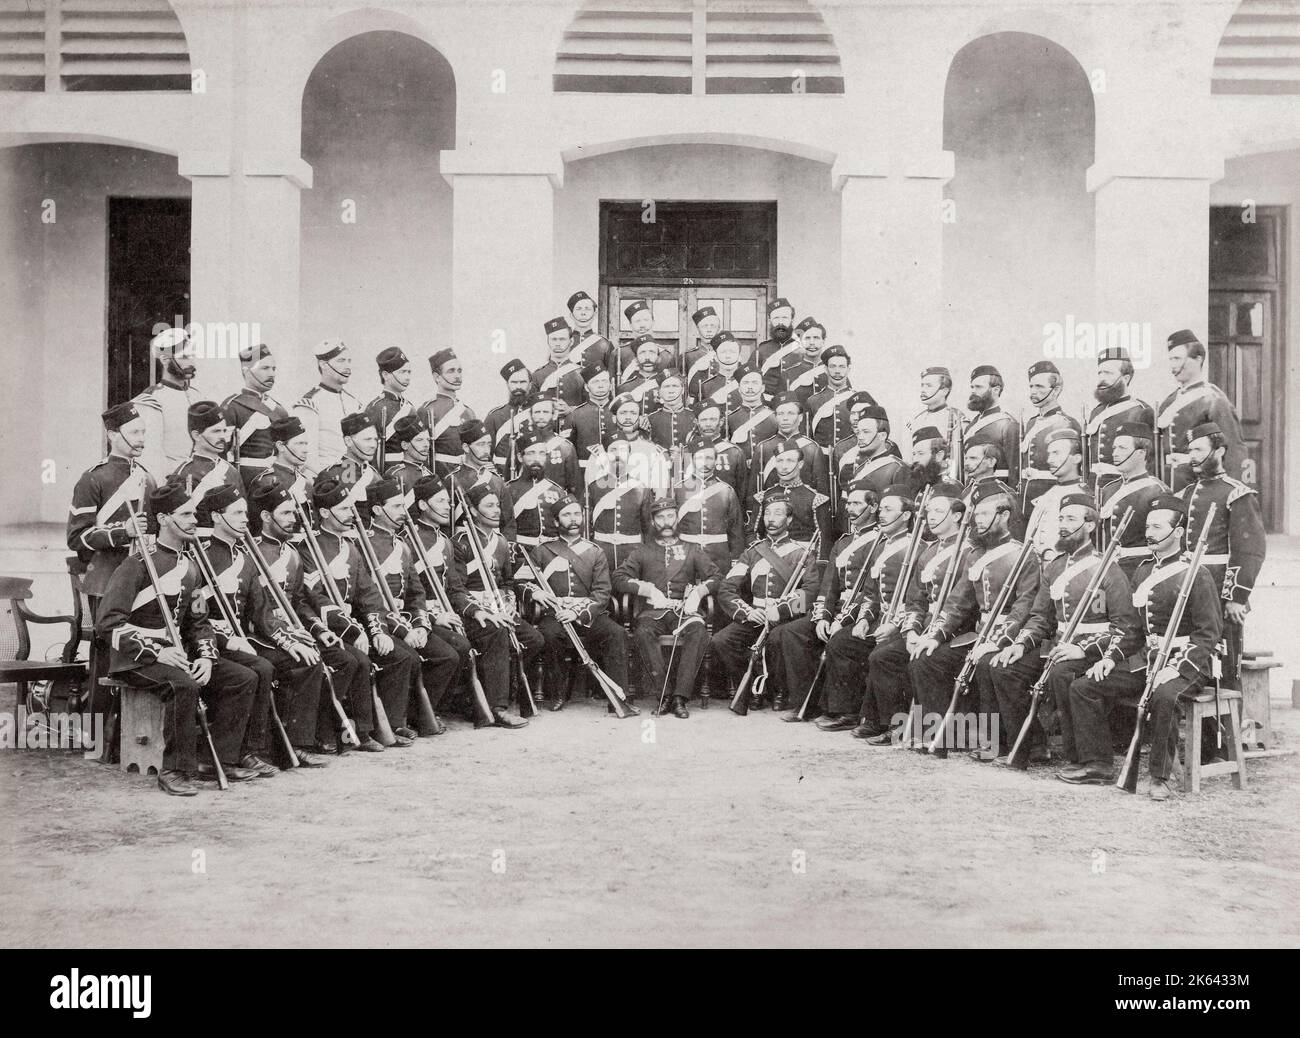 Vintage 19th century photograph - British army in India - officers of the 77th Regiment, 1860s Stock Photo